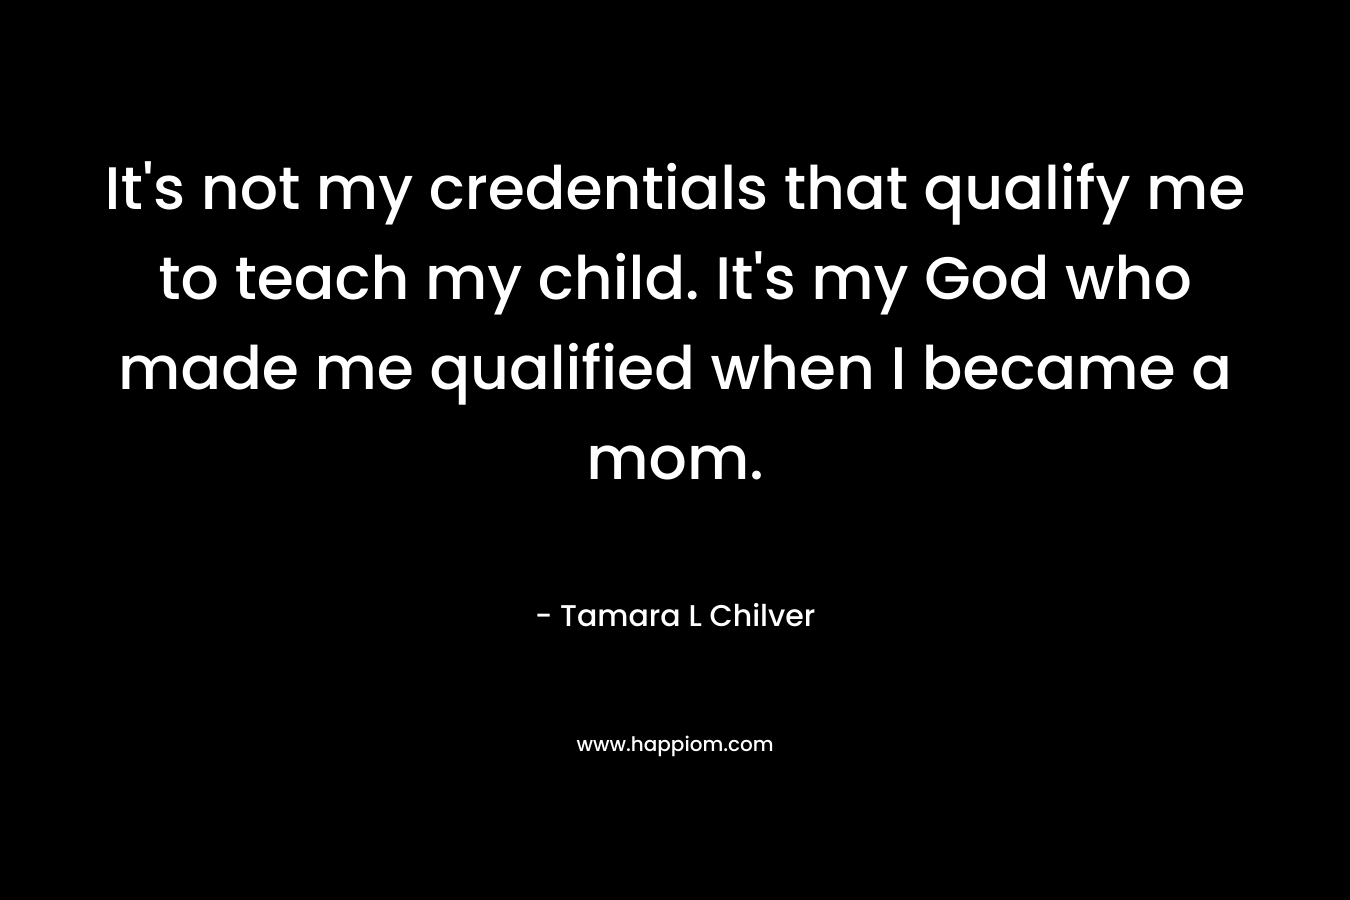 It's not my credentials that qualify me to teach my child. It's my God who made me qualified when I became a mom.